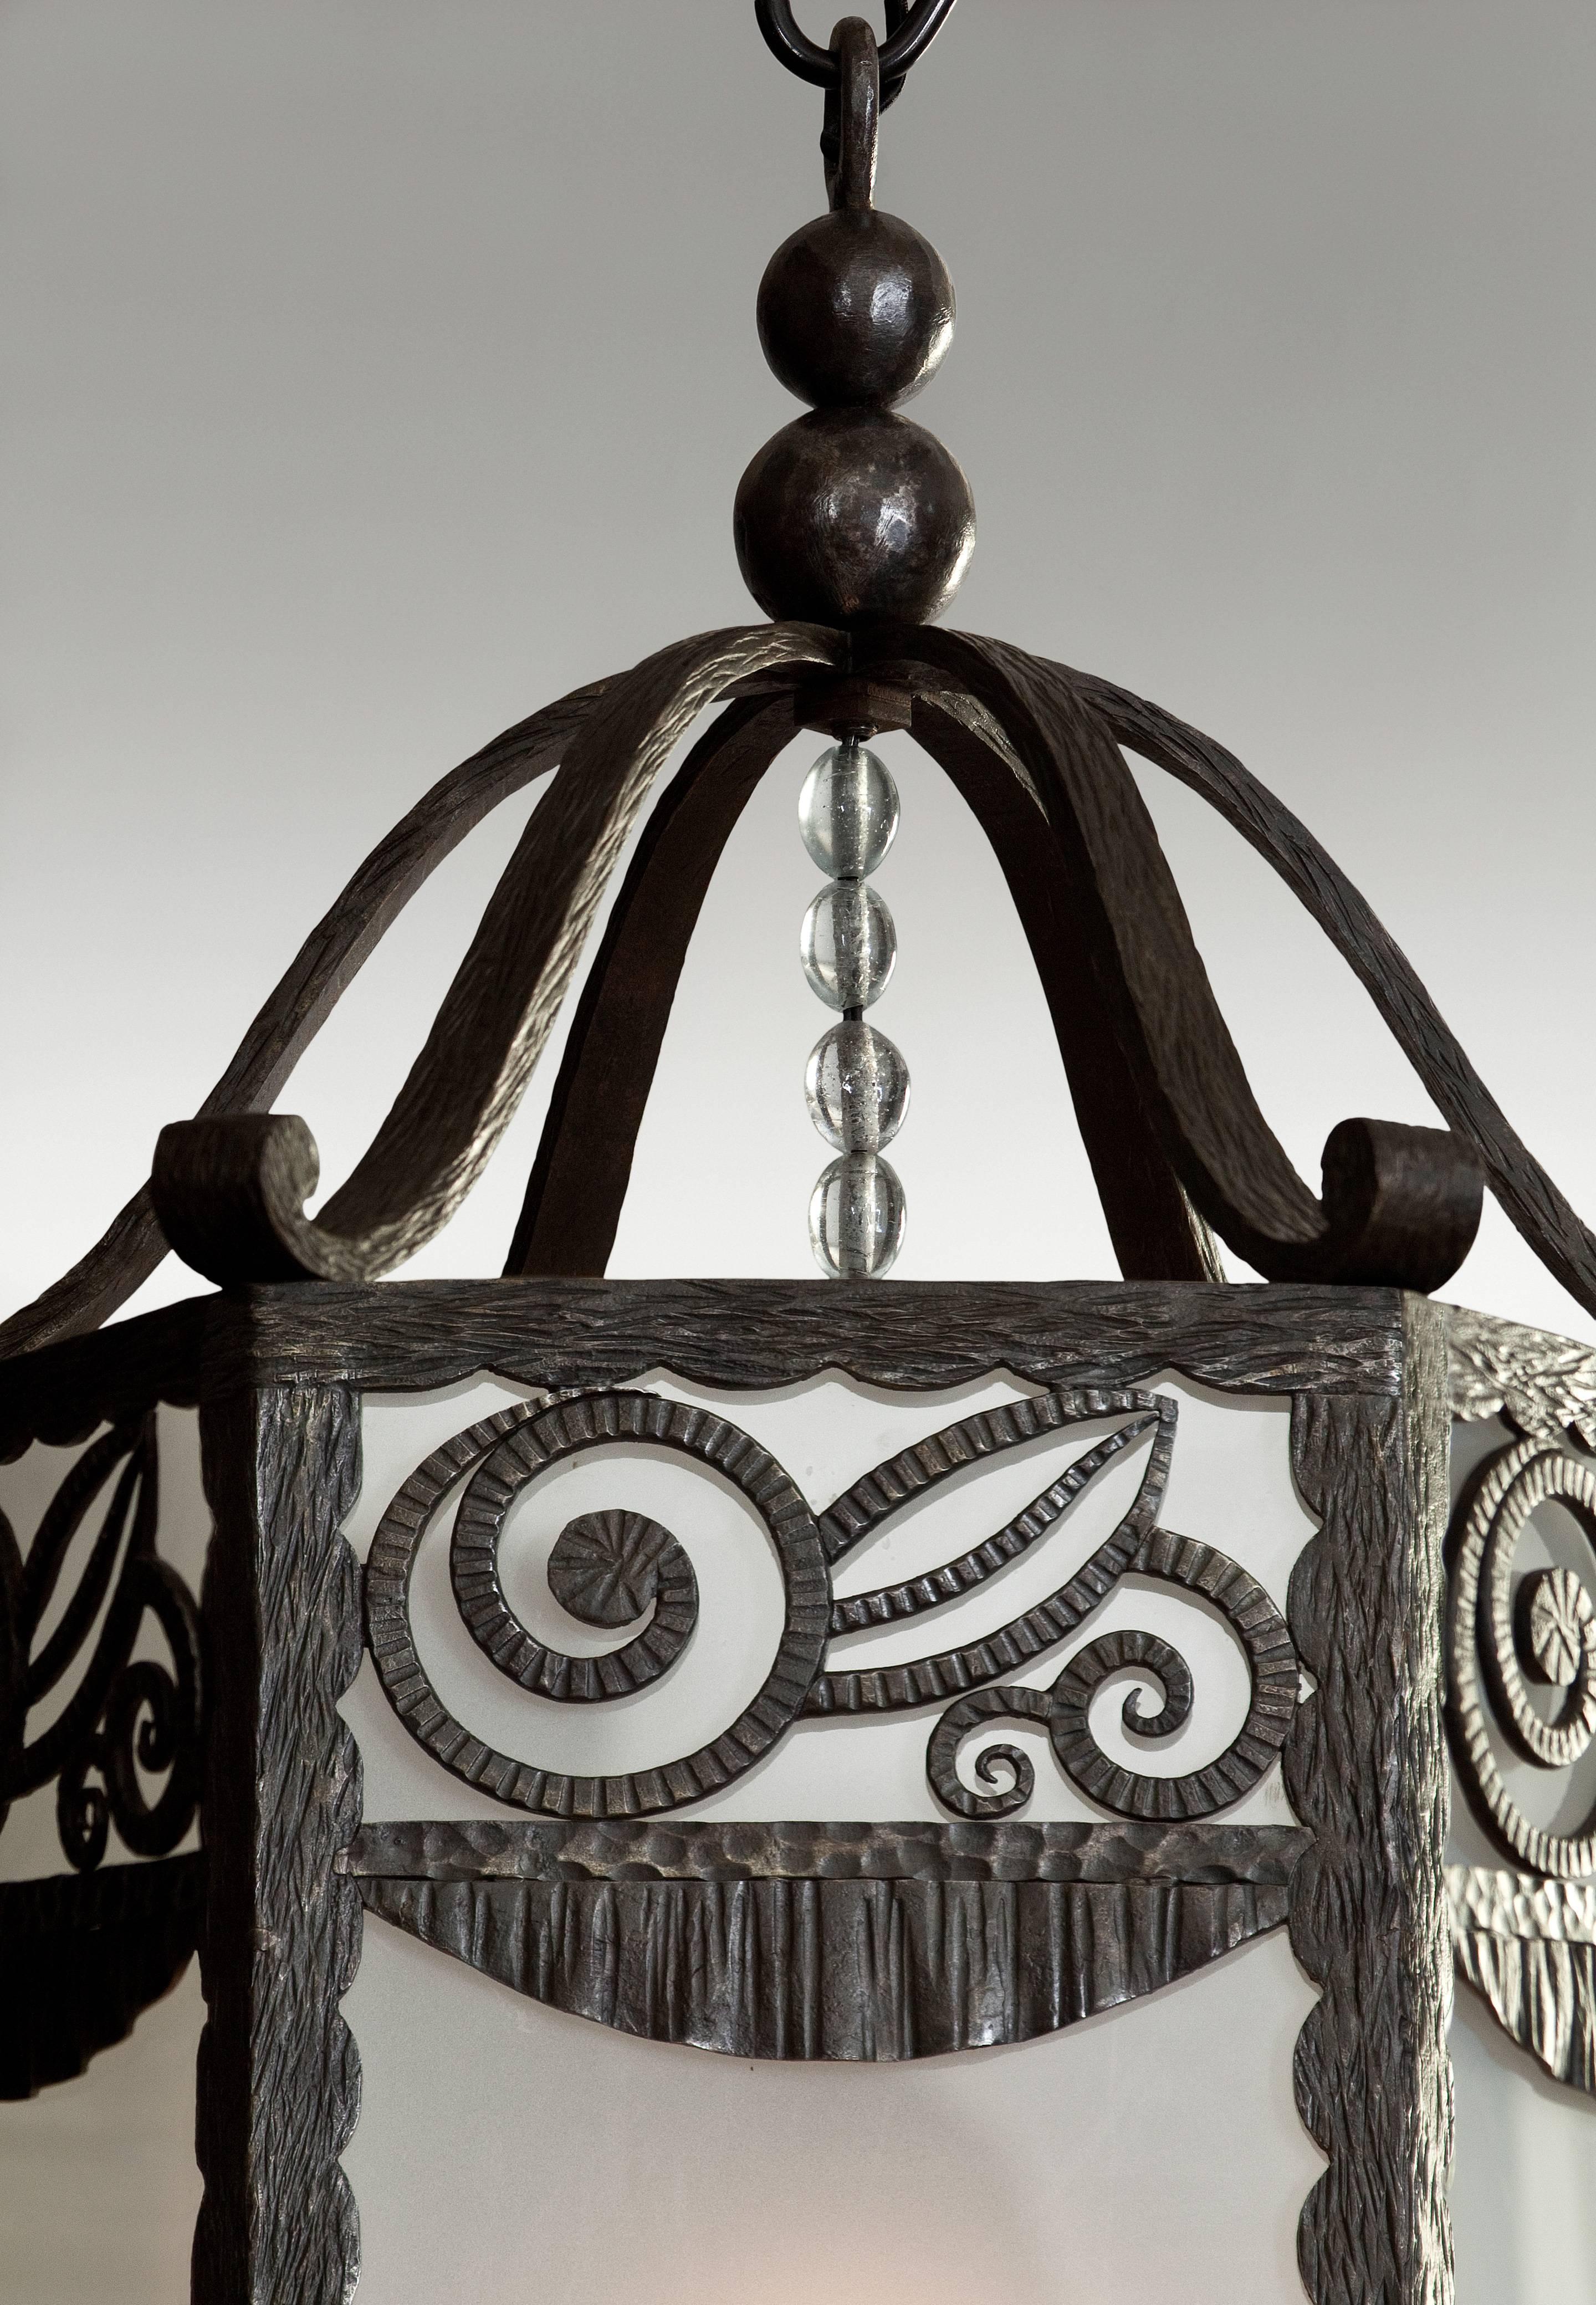 The lantern surmounted by two spheres issuing s-scrolls, above a floral frieze and rectangular panels silhouetted by opaque glass, the light fixture suspended by rock crystal beads, terminating in iron tassels.